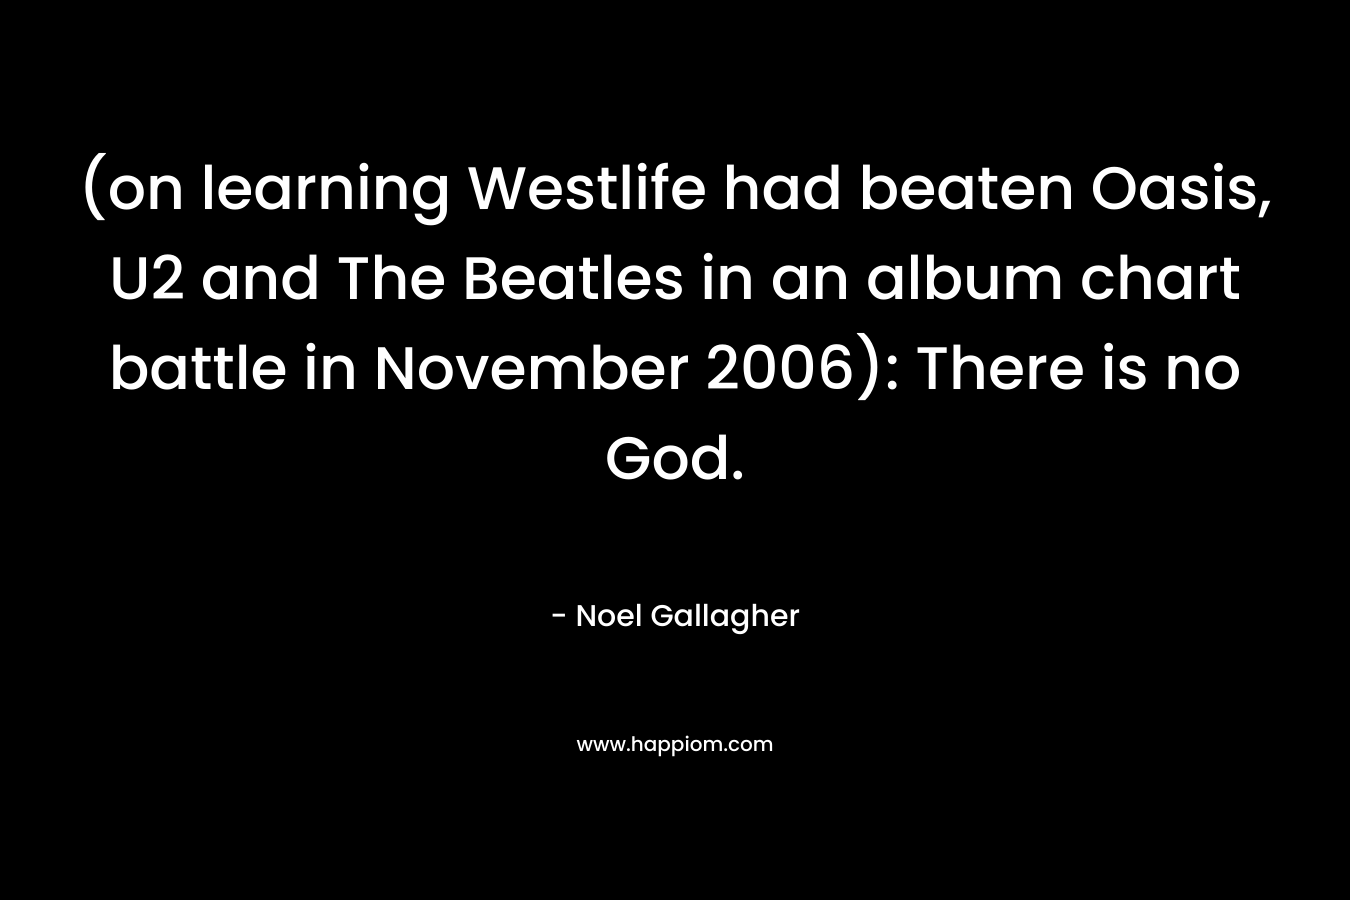 (on learning Westlife had beaten Oasis, U2 and The Beatles in an album chart battle in November 2006): There is no God. – Noel Gallagher